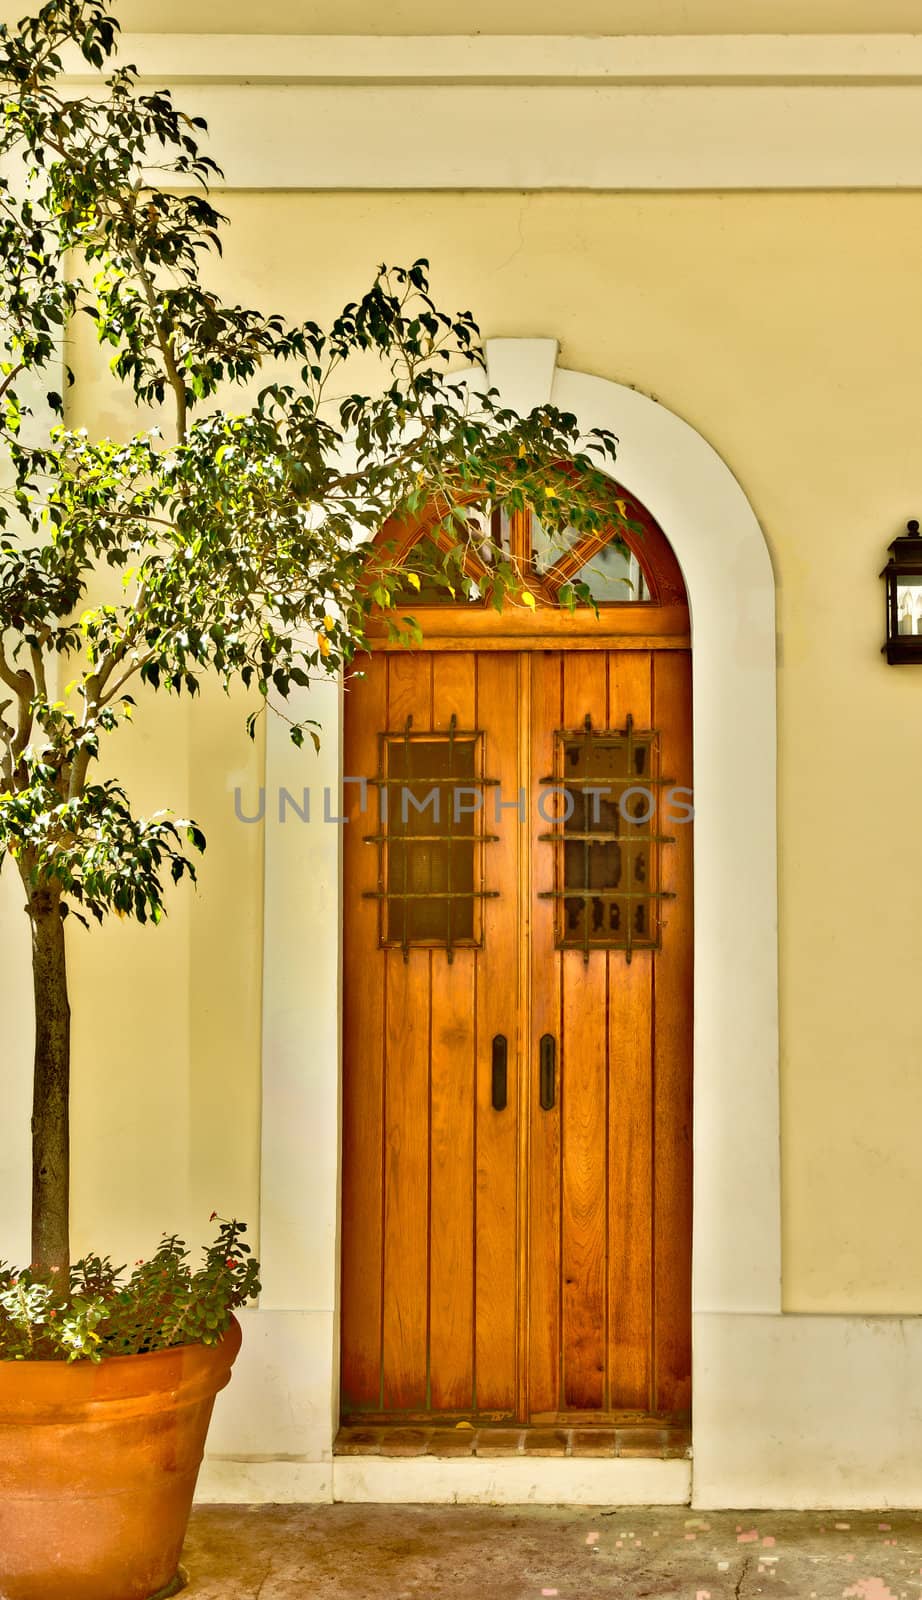 Arched doorway with ornate door and iron bars